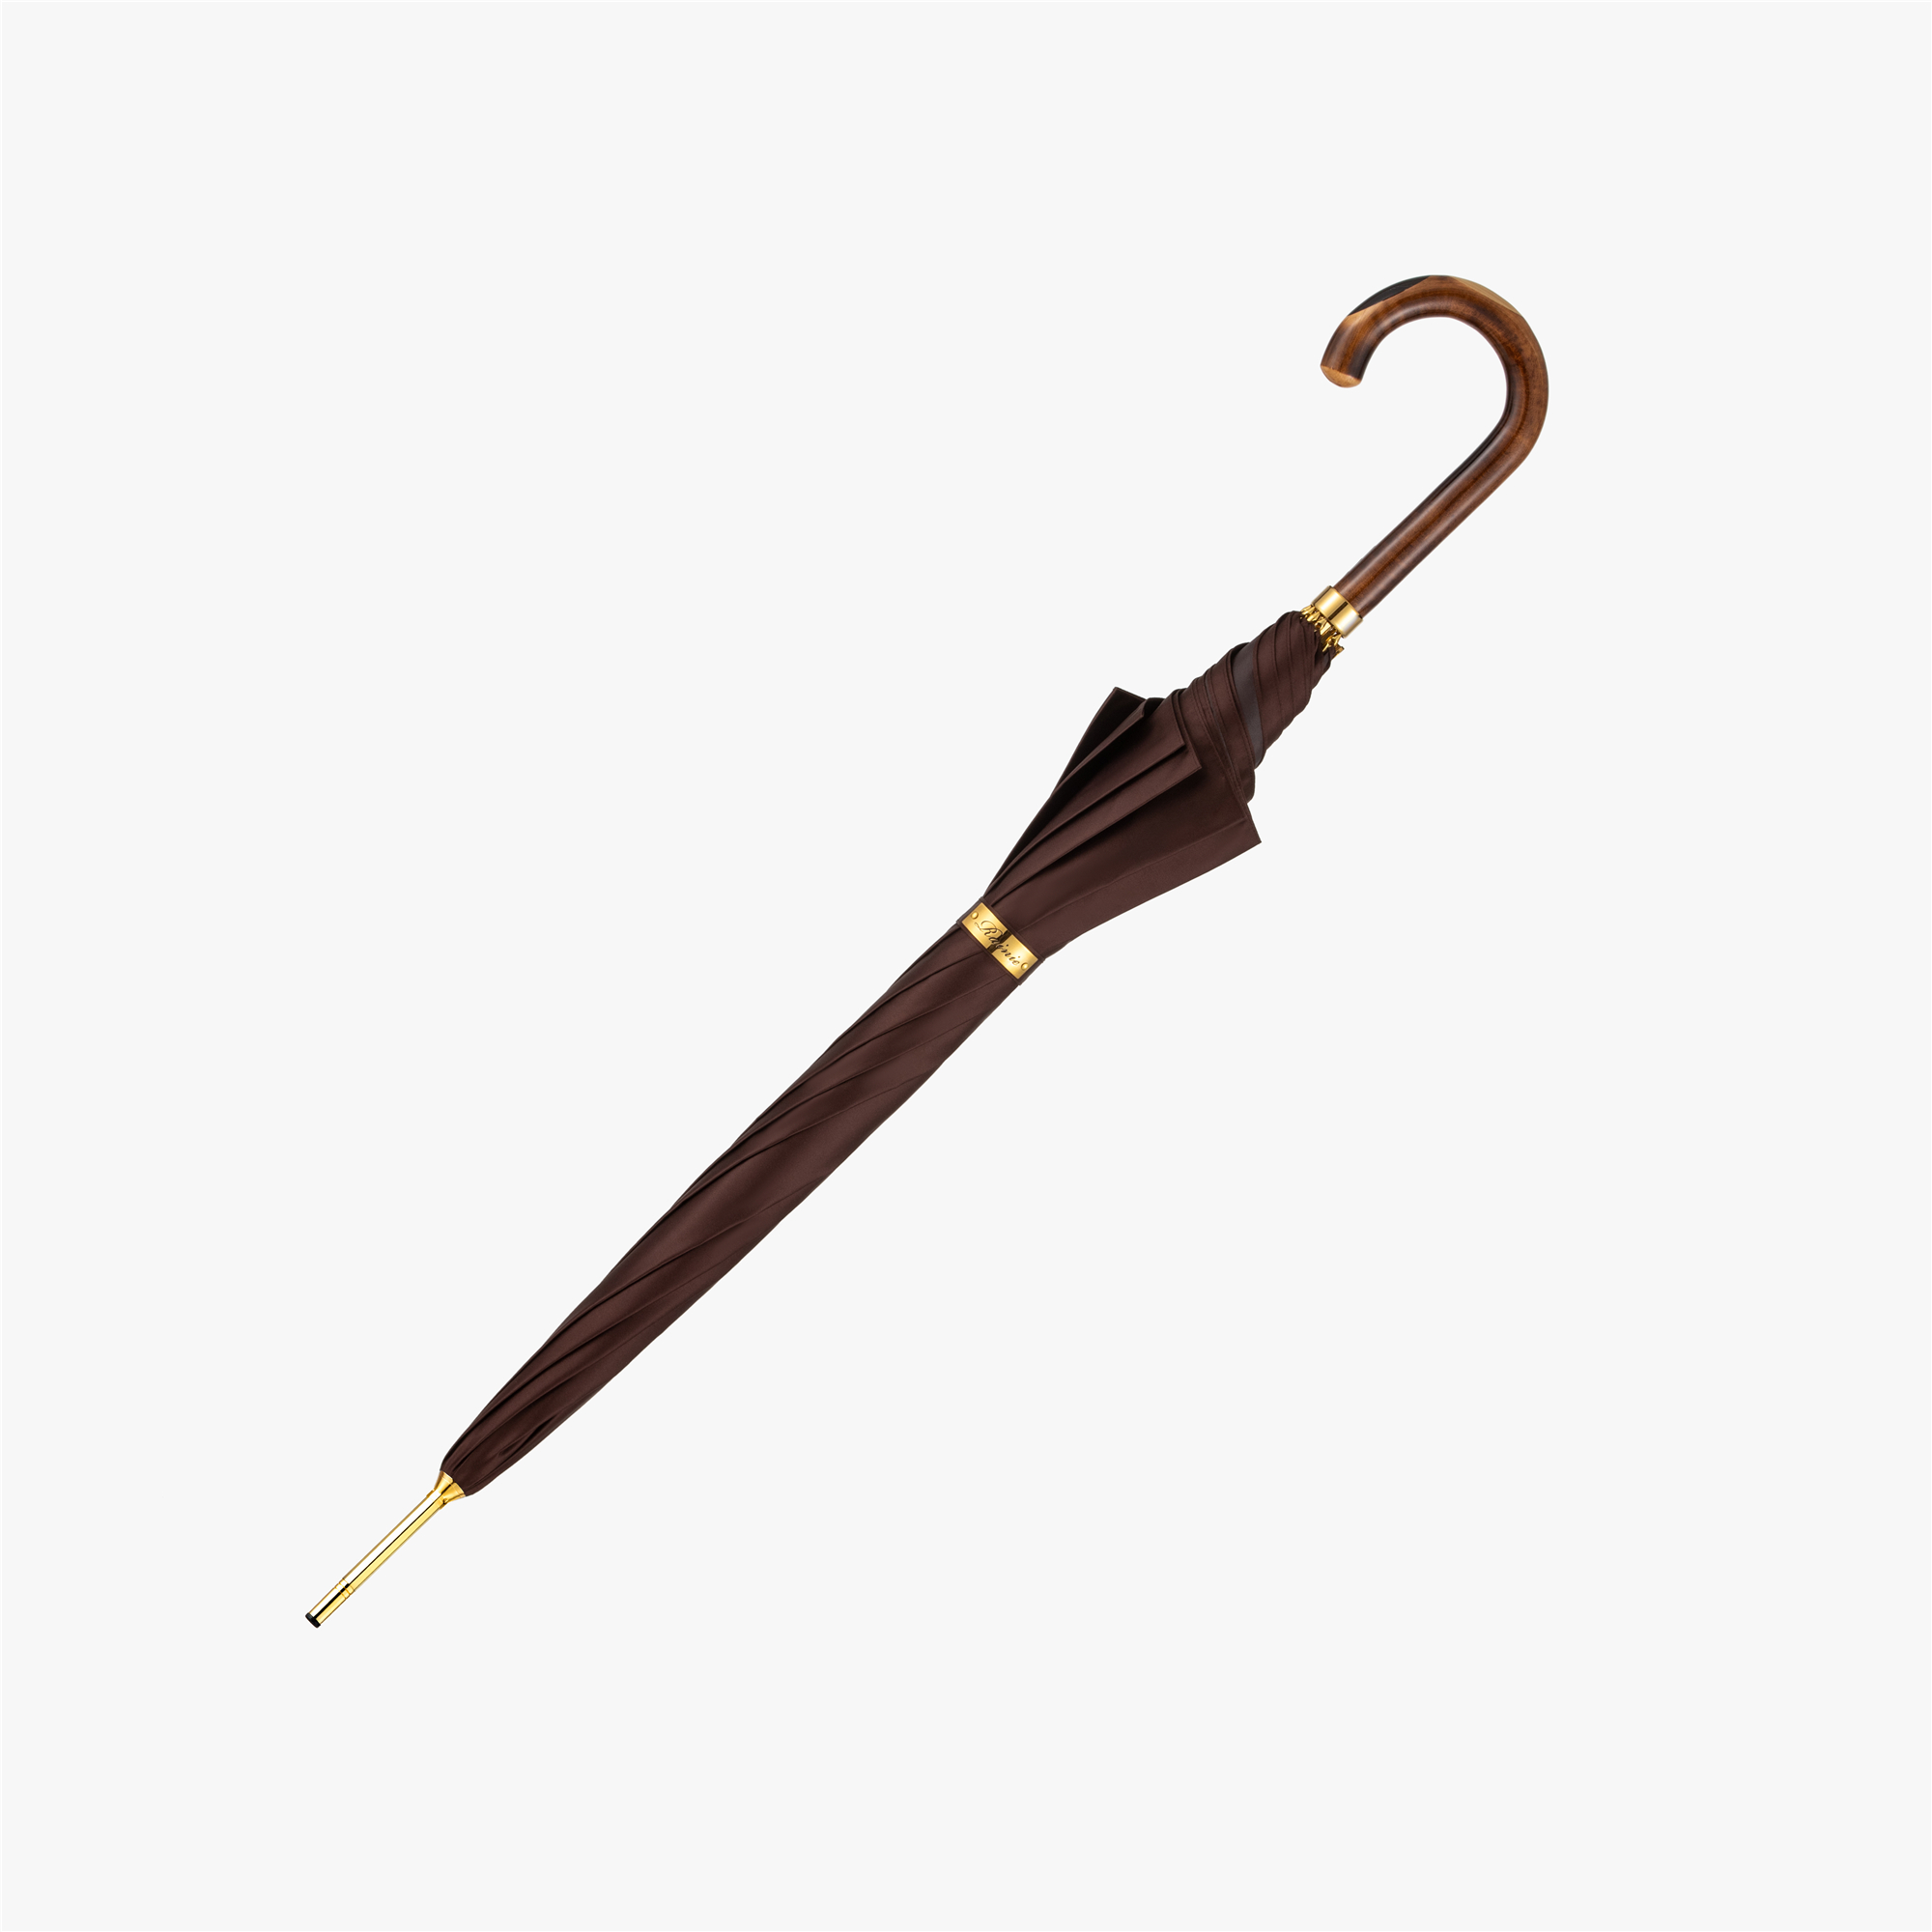 Maple ox horn umbrella with straight handle